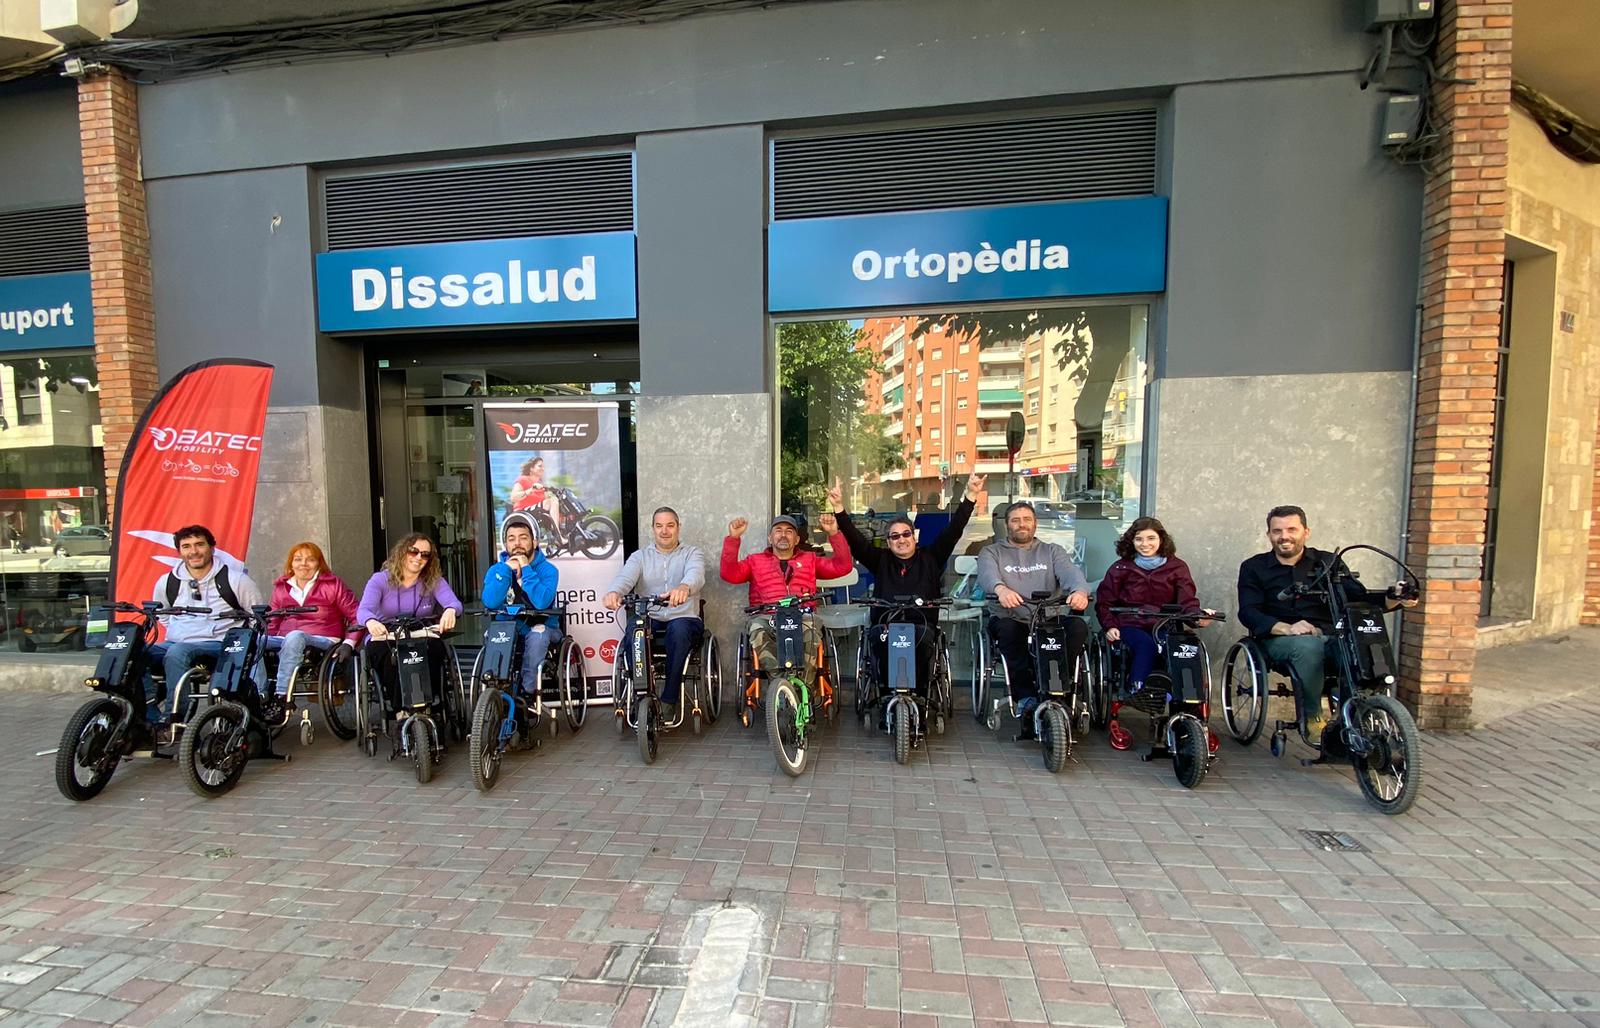 Dissalud, Batec Mobility official servicie in Lleida